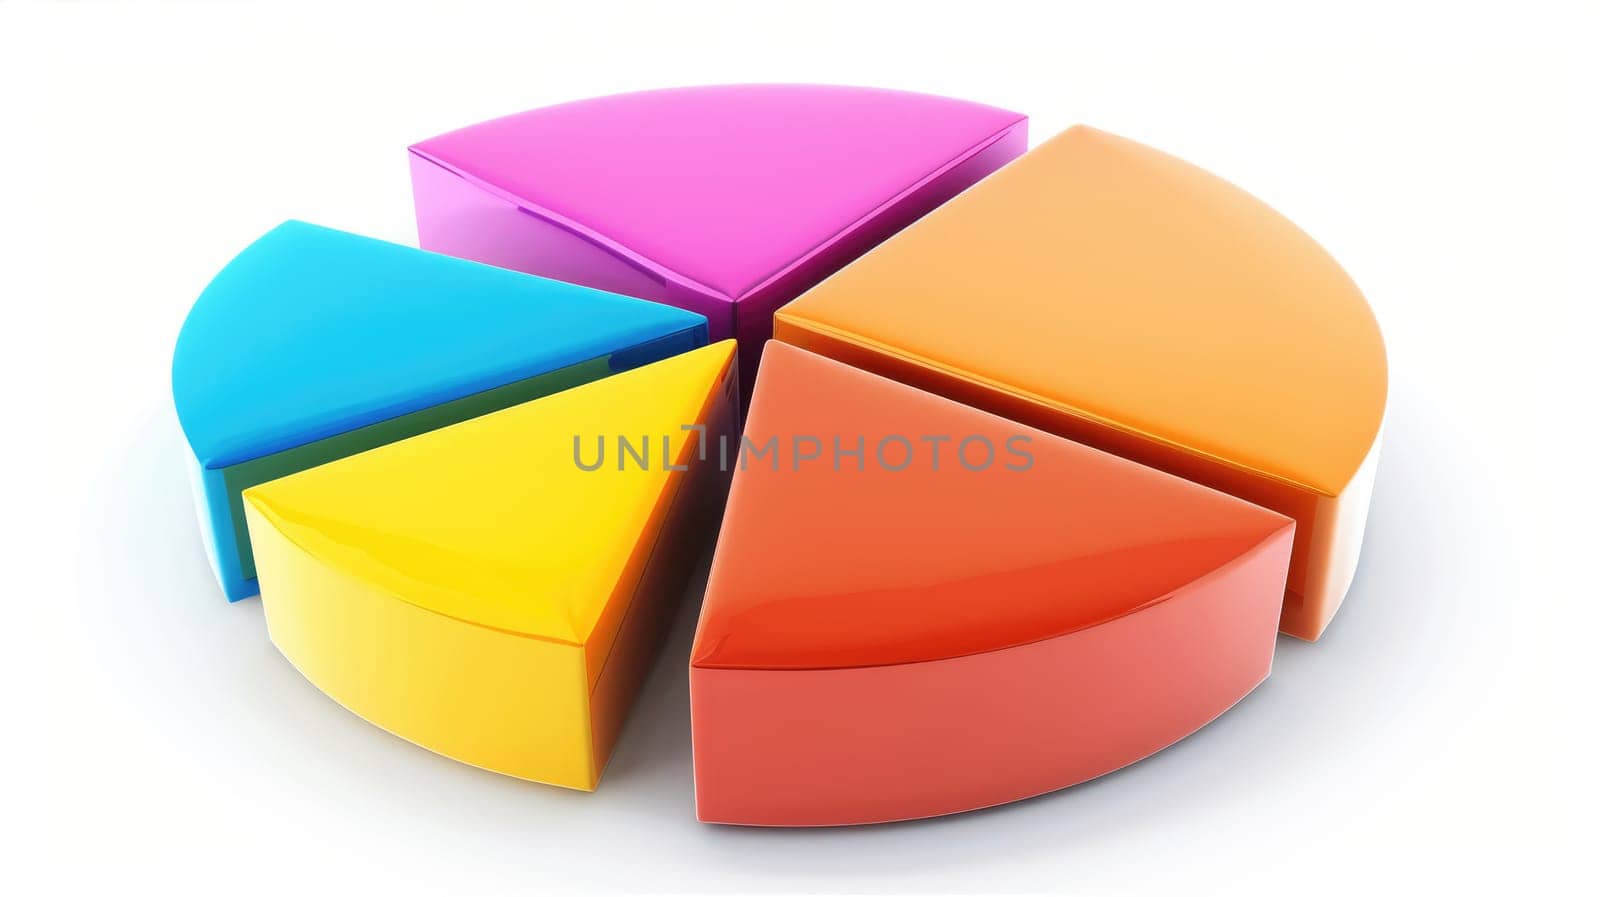 Abstract business pie chart made from colored parts. Business pie chart graphics by natali_brill